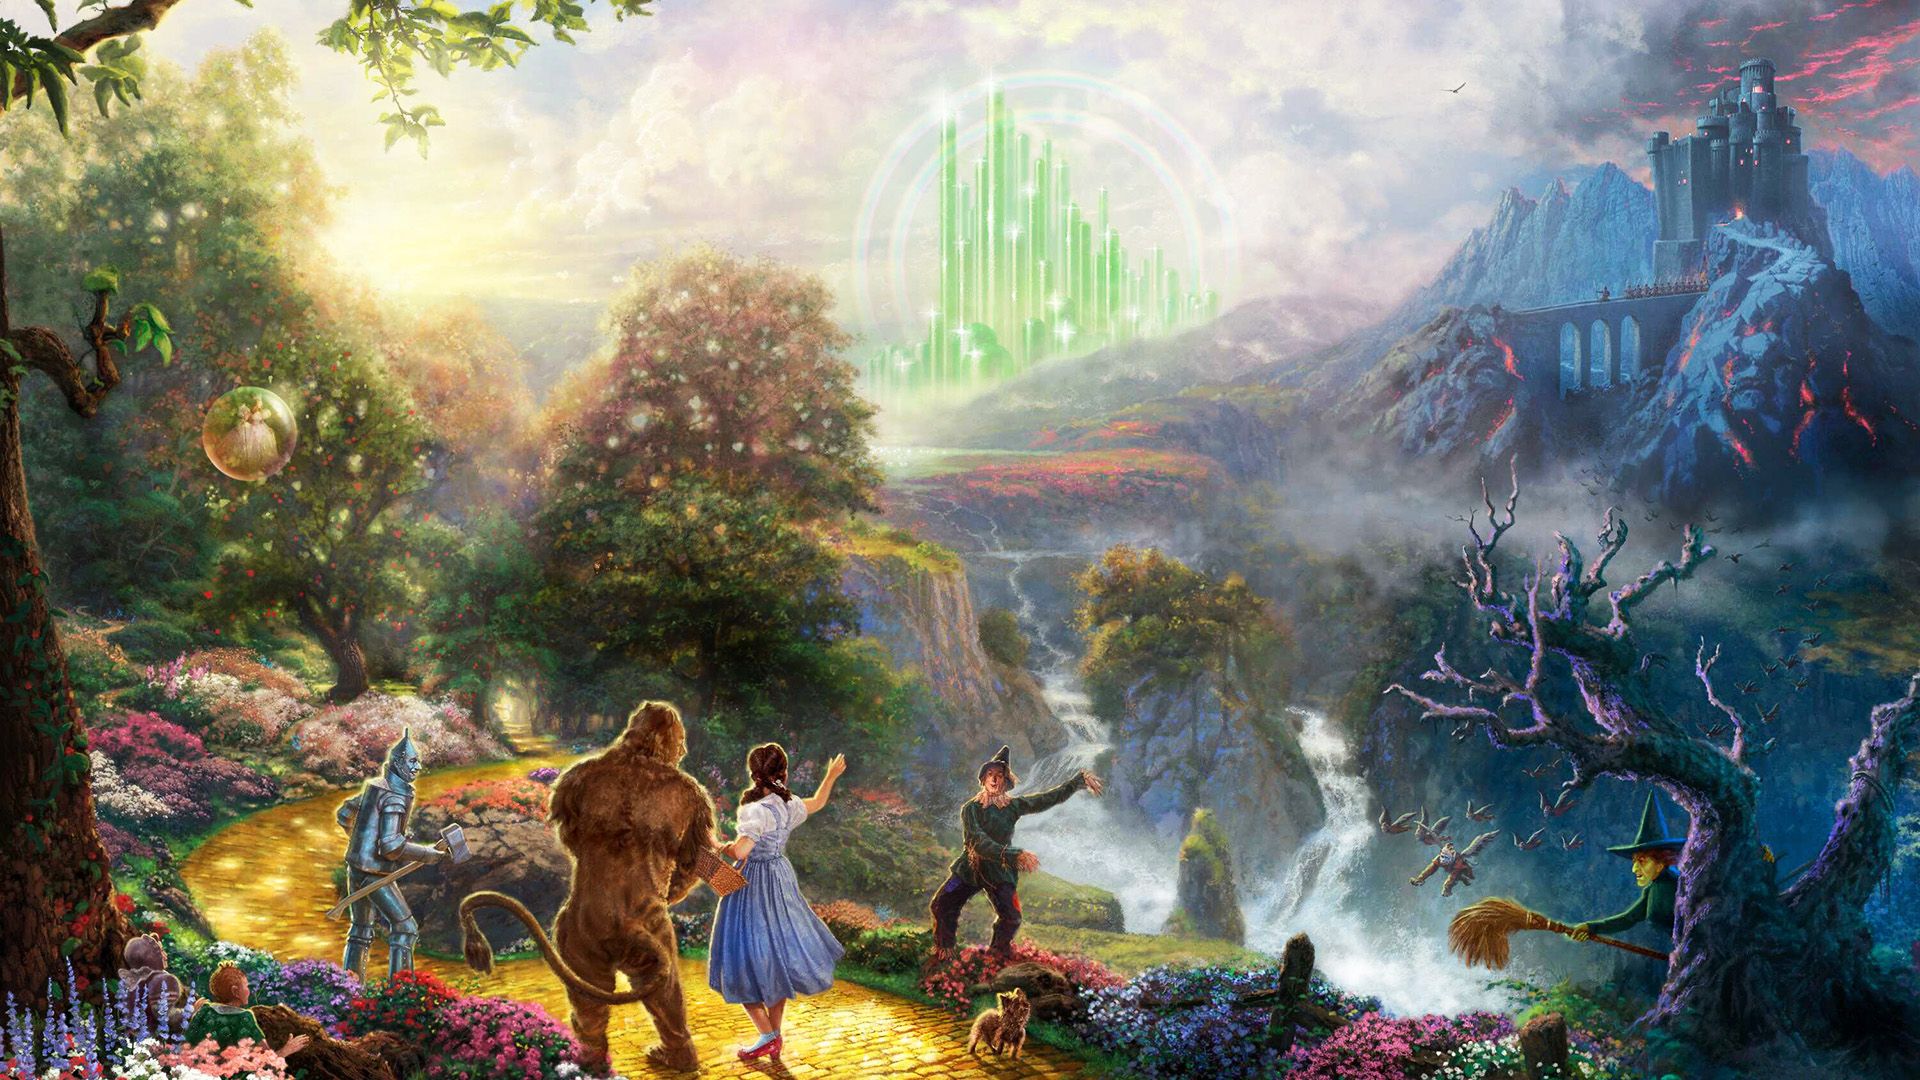 The Wizard of Oz background